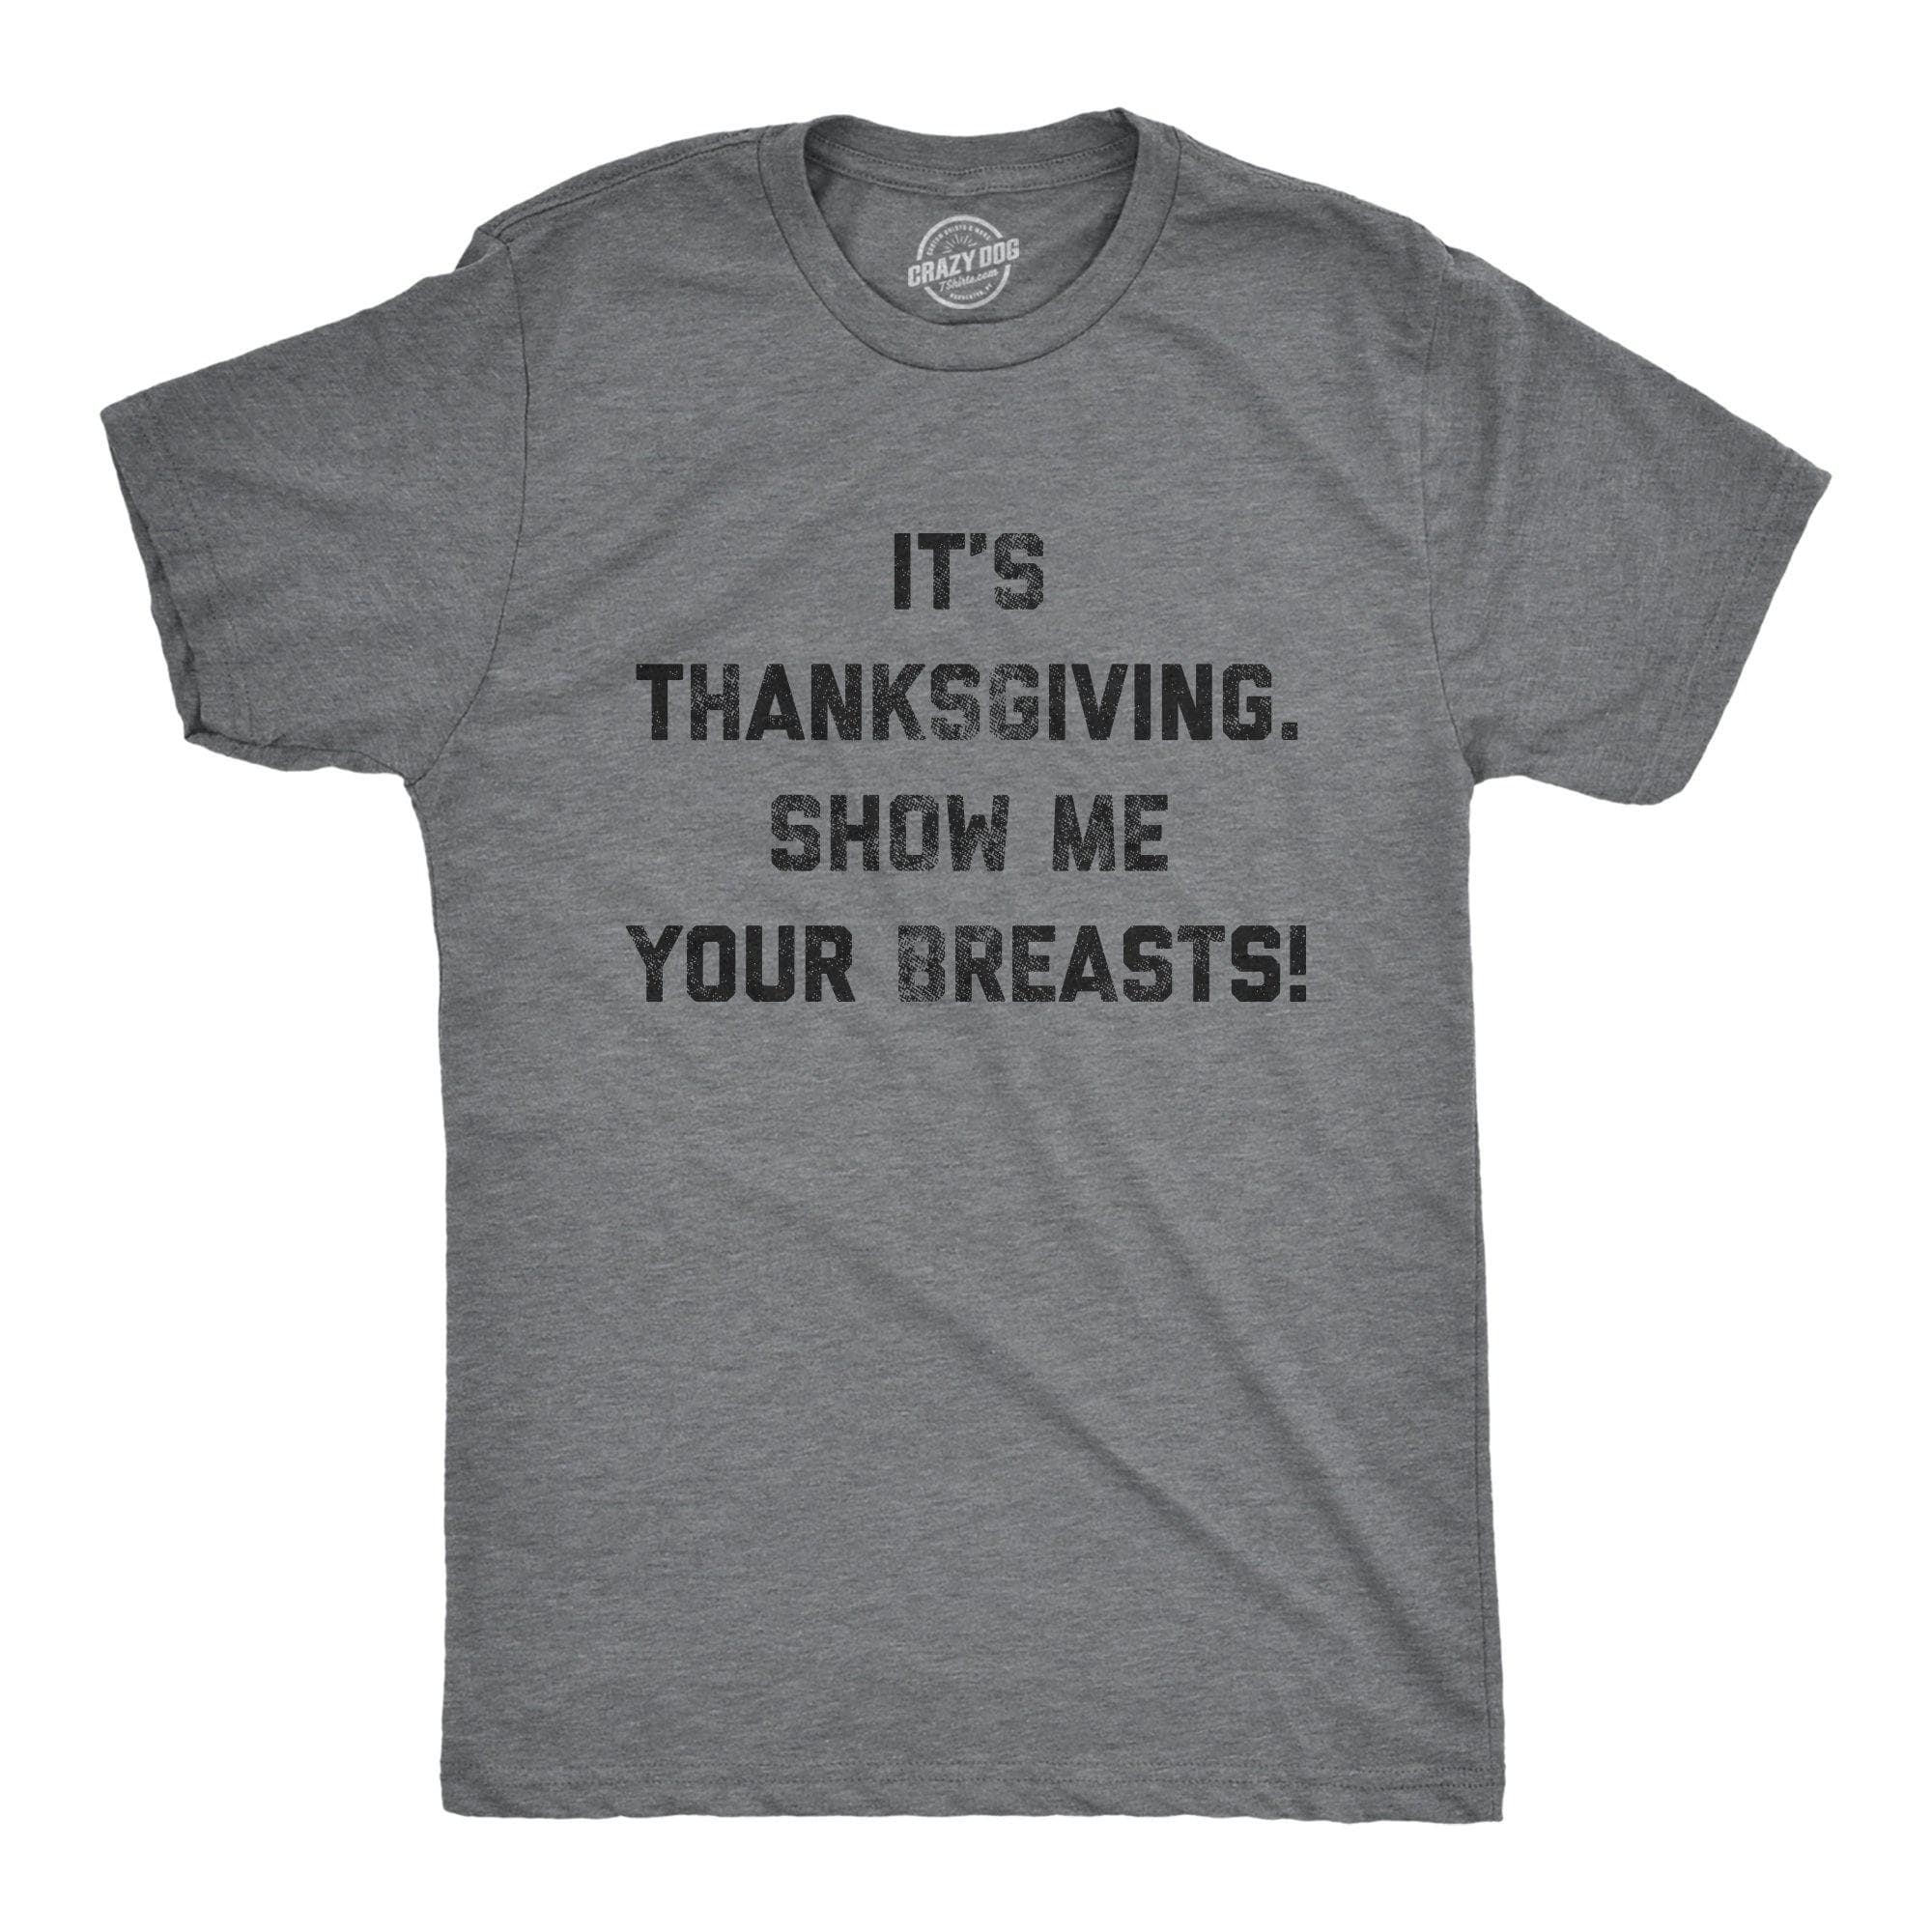 It's Thanksgiving Show Me Your Breasts Men's Tshirt - Crazy Dog T-Shirts